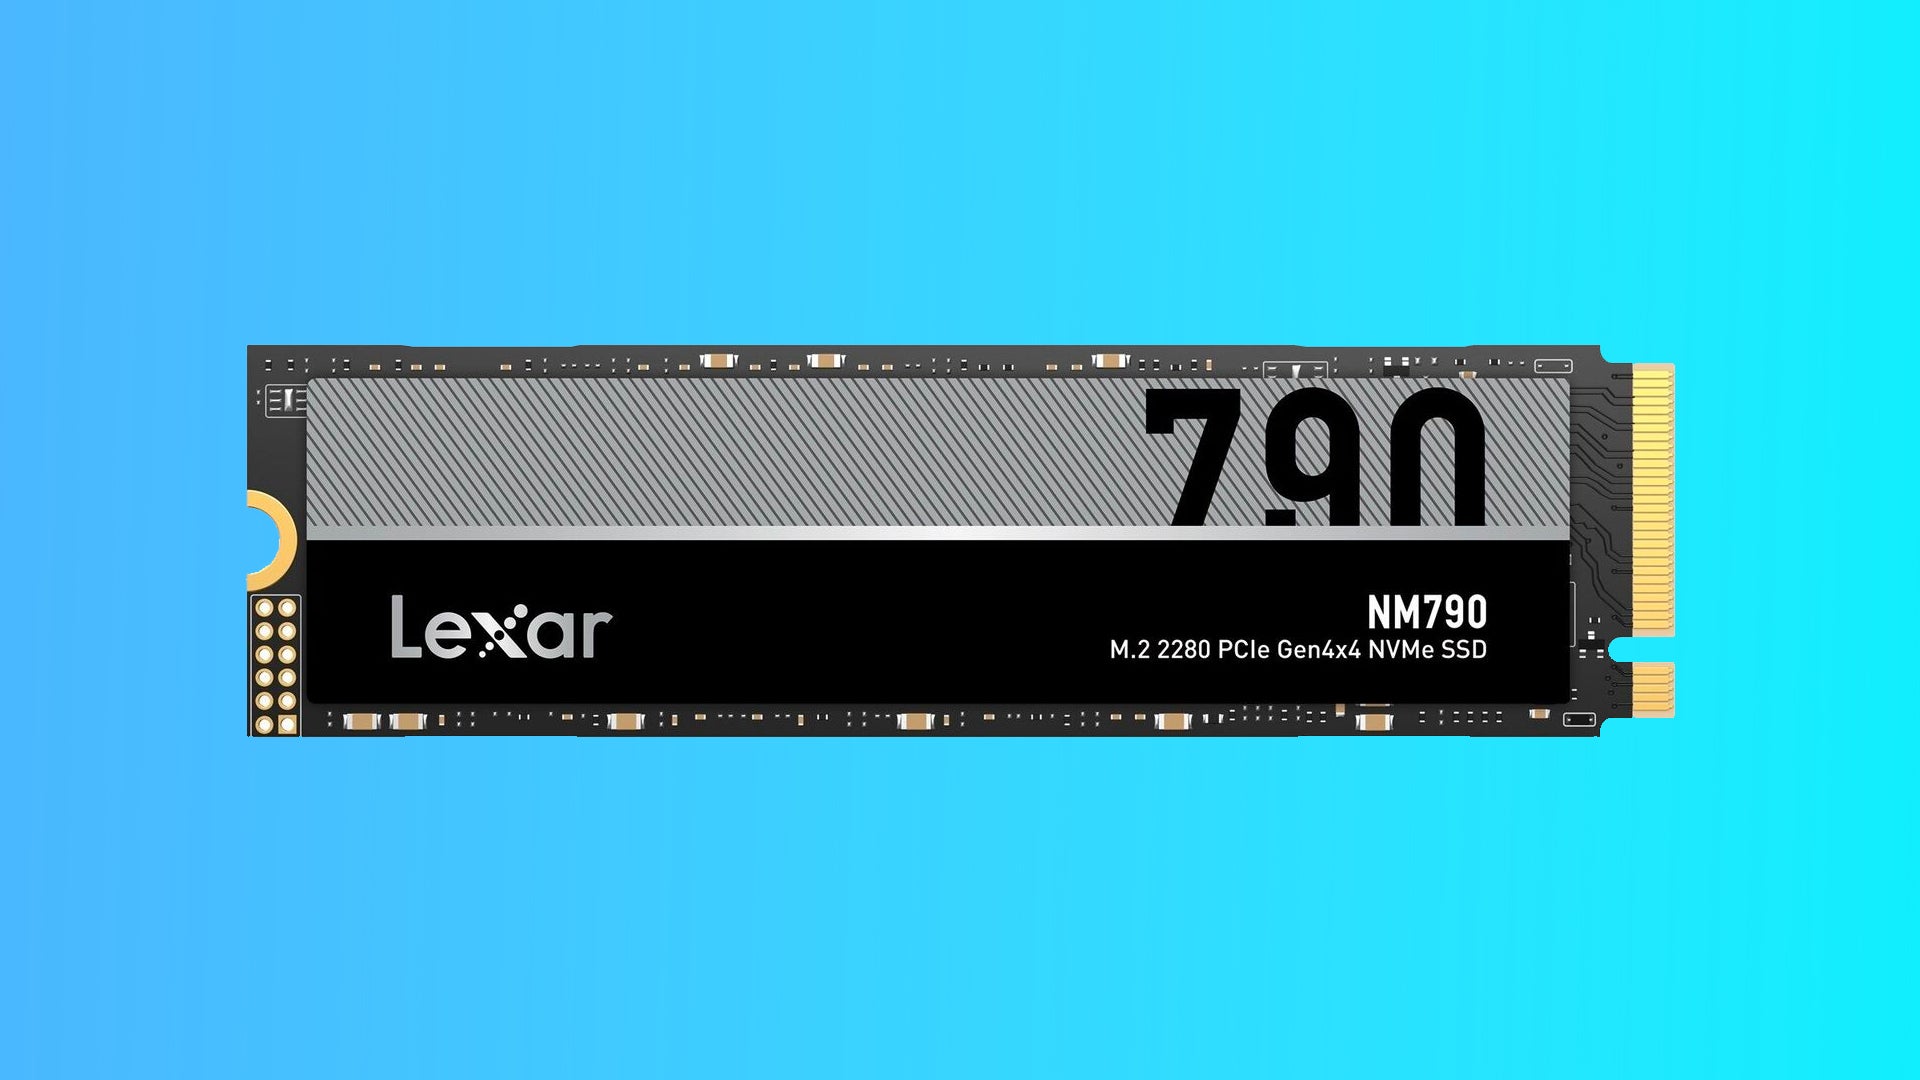 Get this 4TB Lexar NM790 (and a free heatsink) for £230 from Scan 